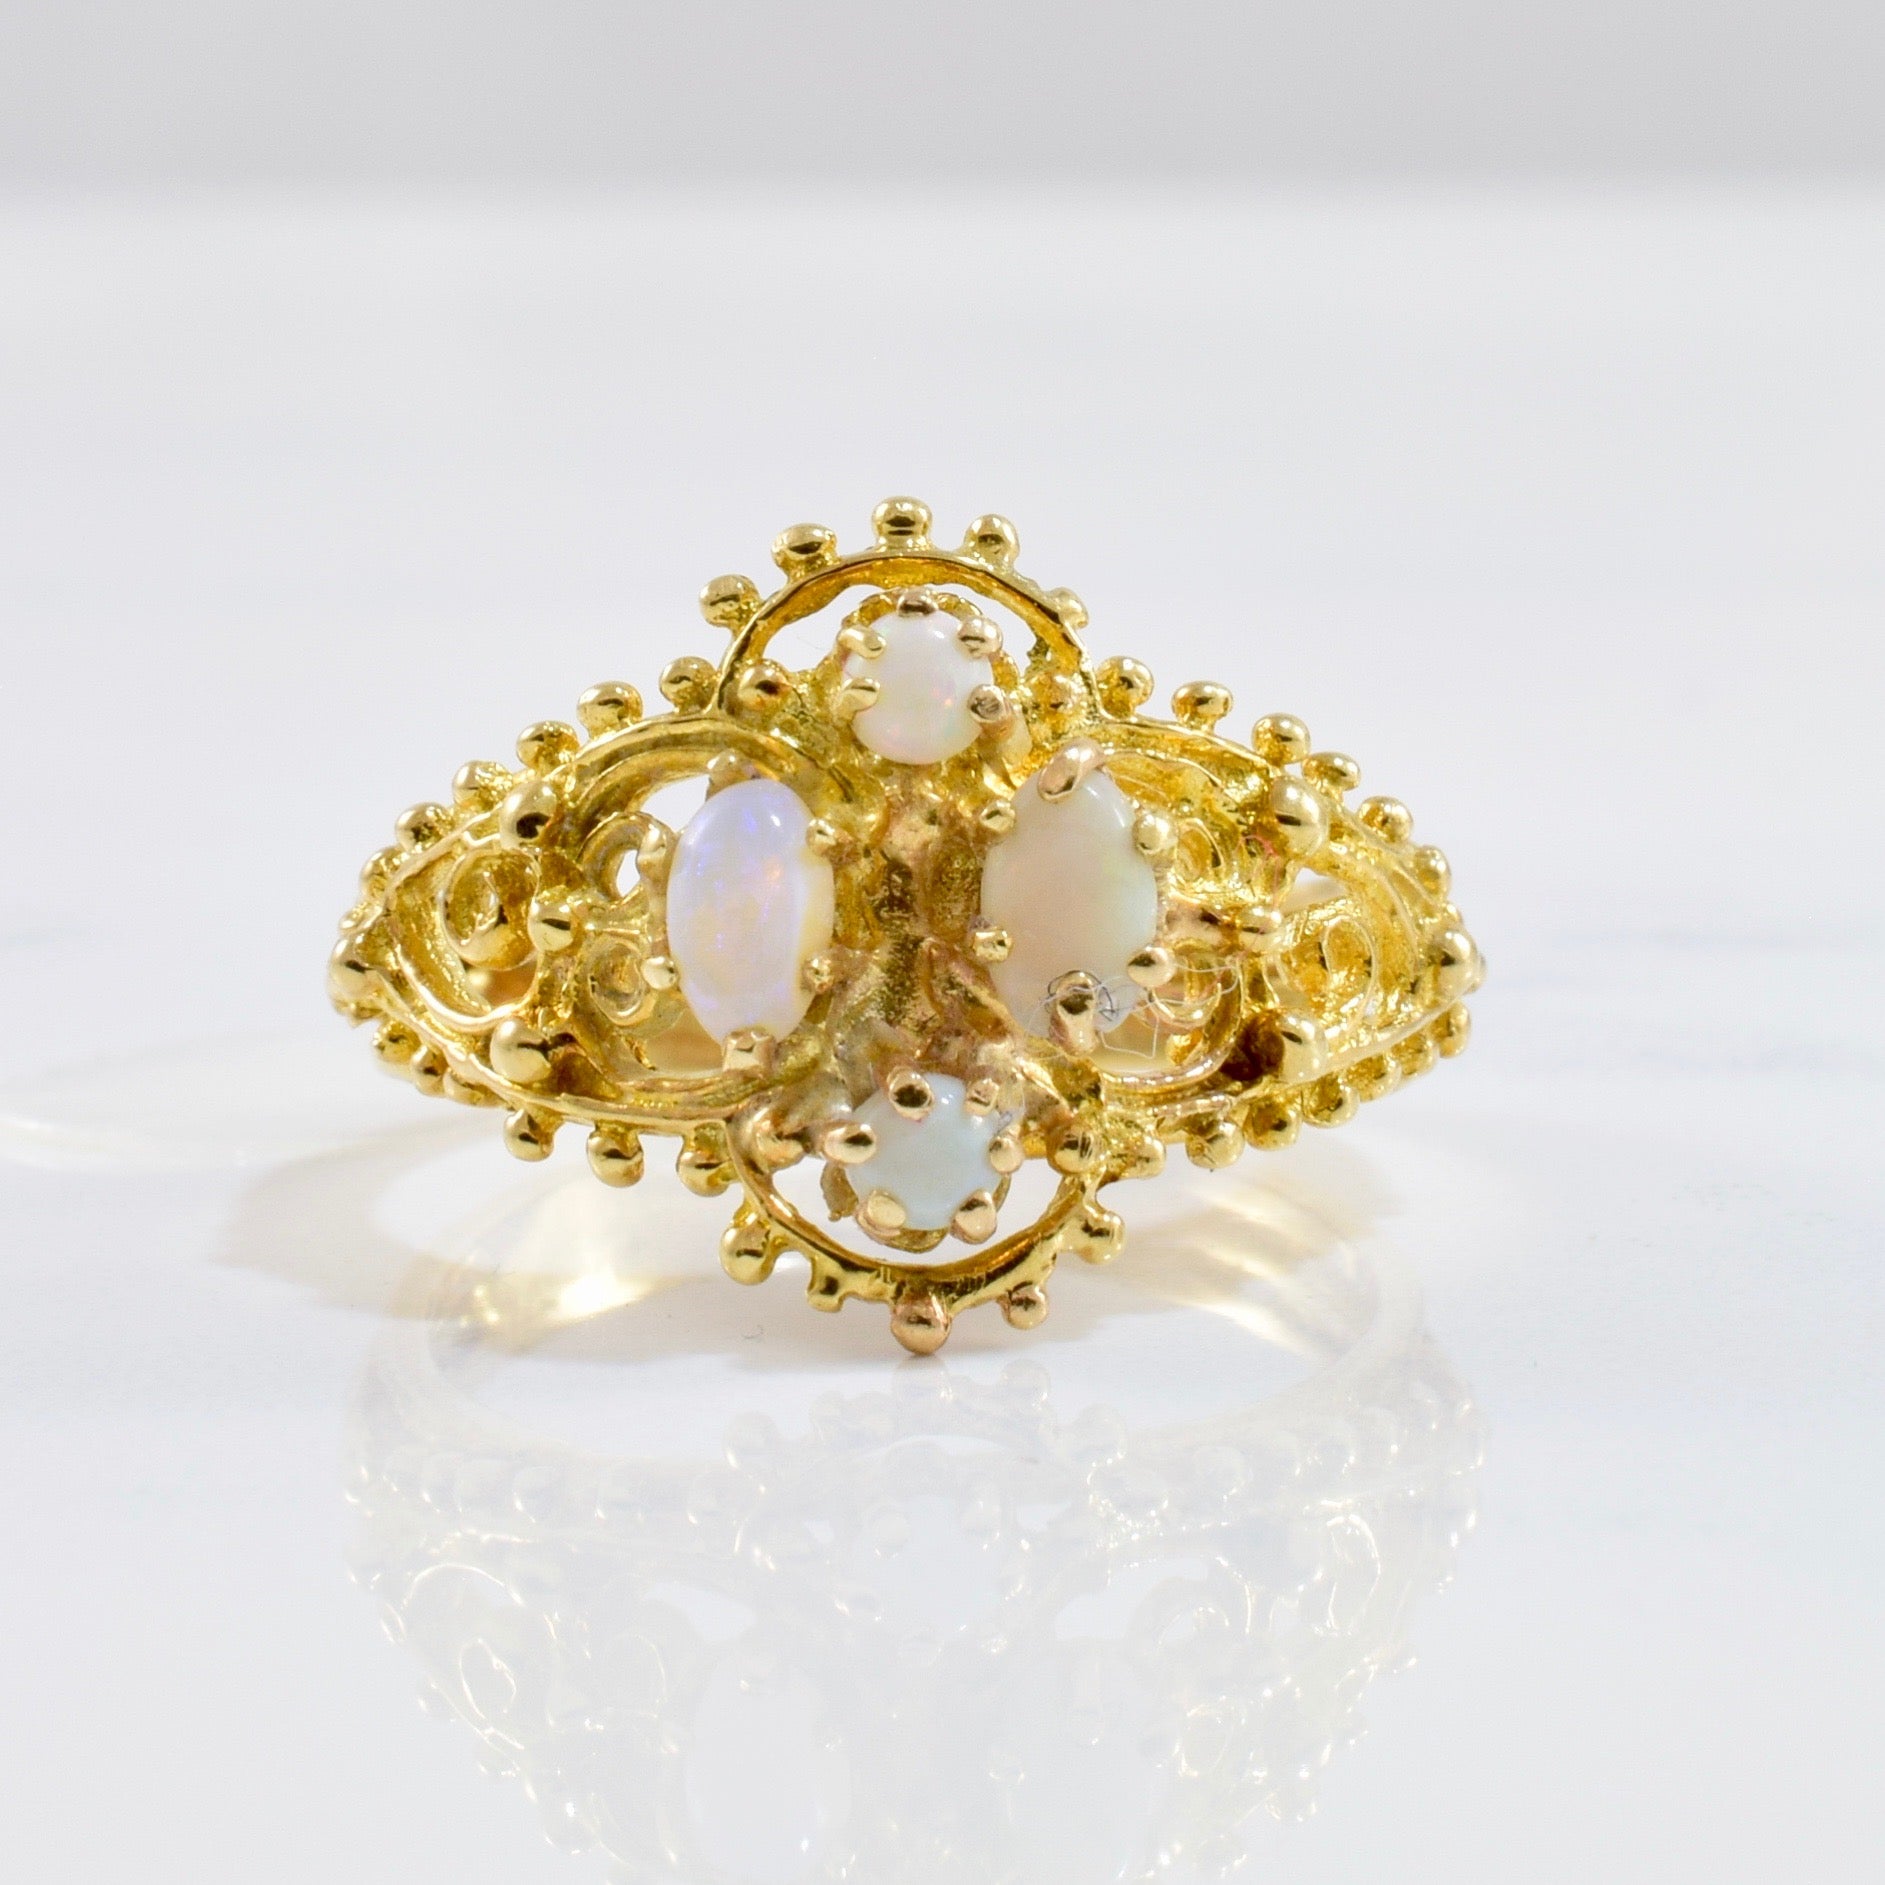 Opal and Gold Design Ring | SZ 7.25 |